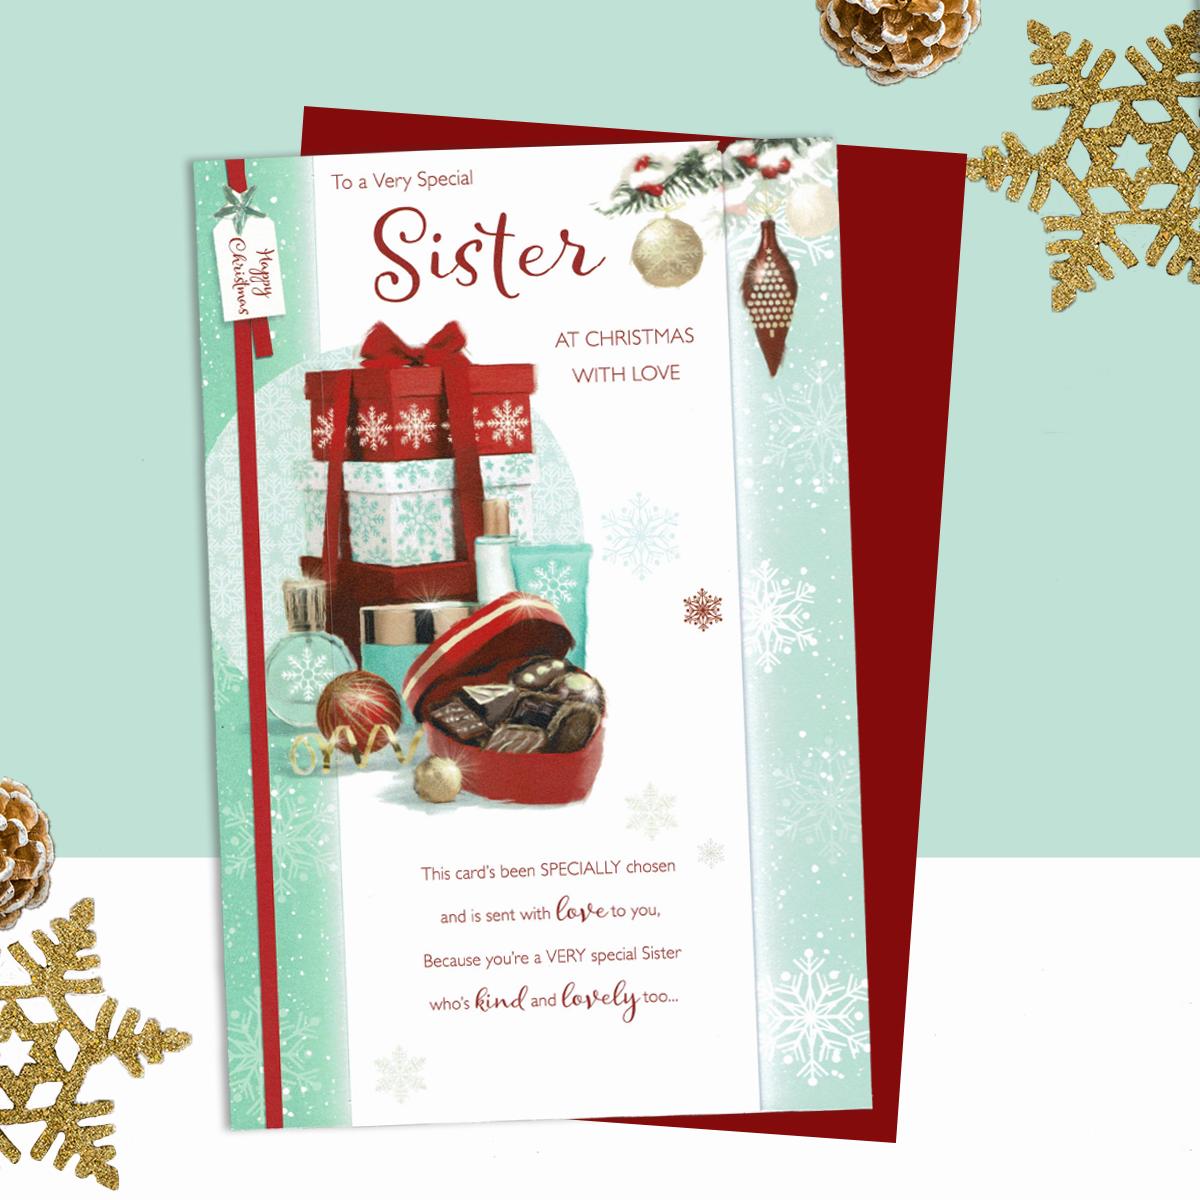 Special Sister Christmas Card Alongside Its Red Envelope